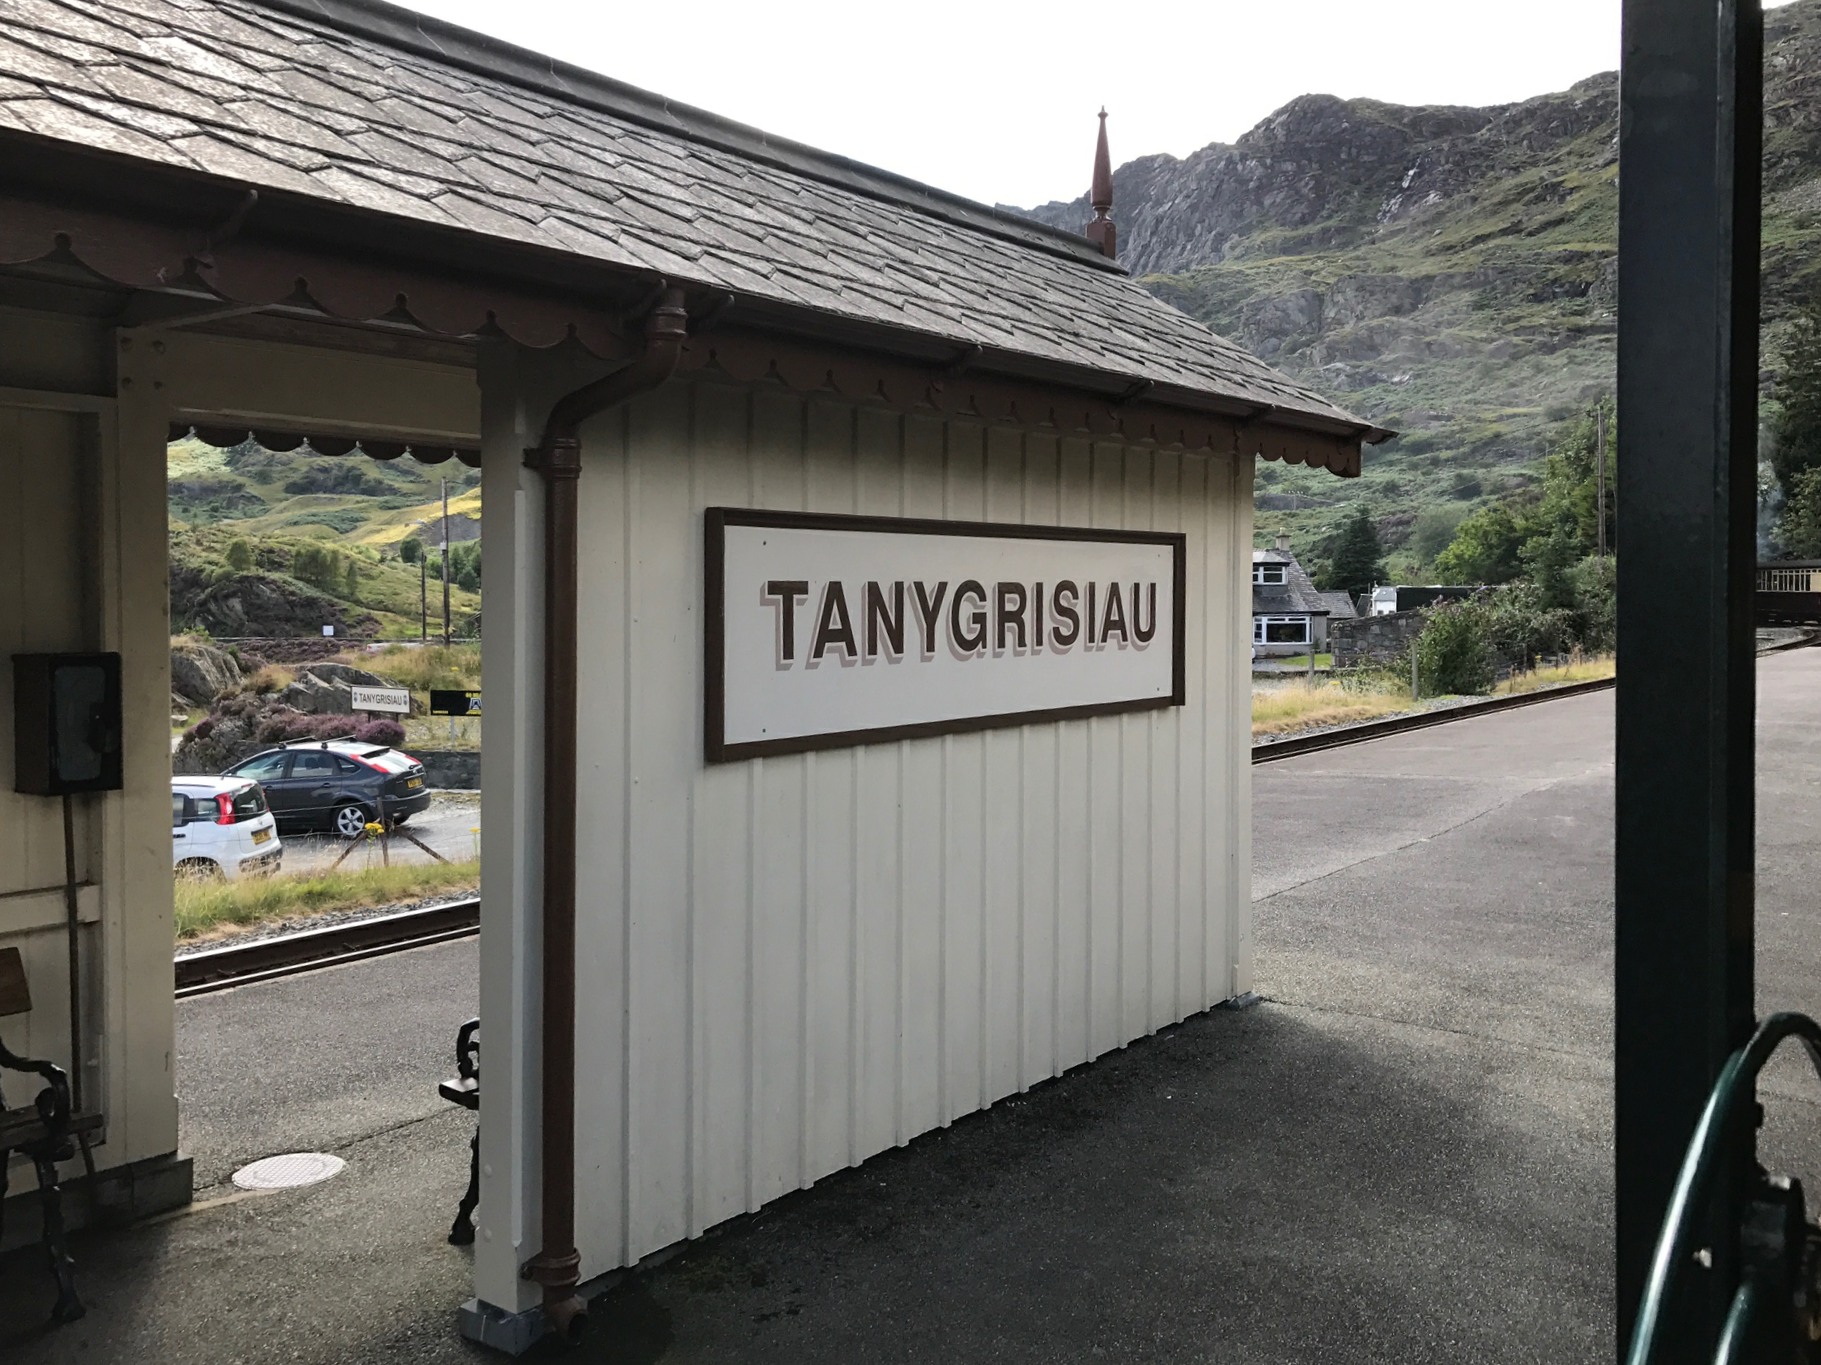 Great Little Trains of Wales: Tanygrisiau.